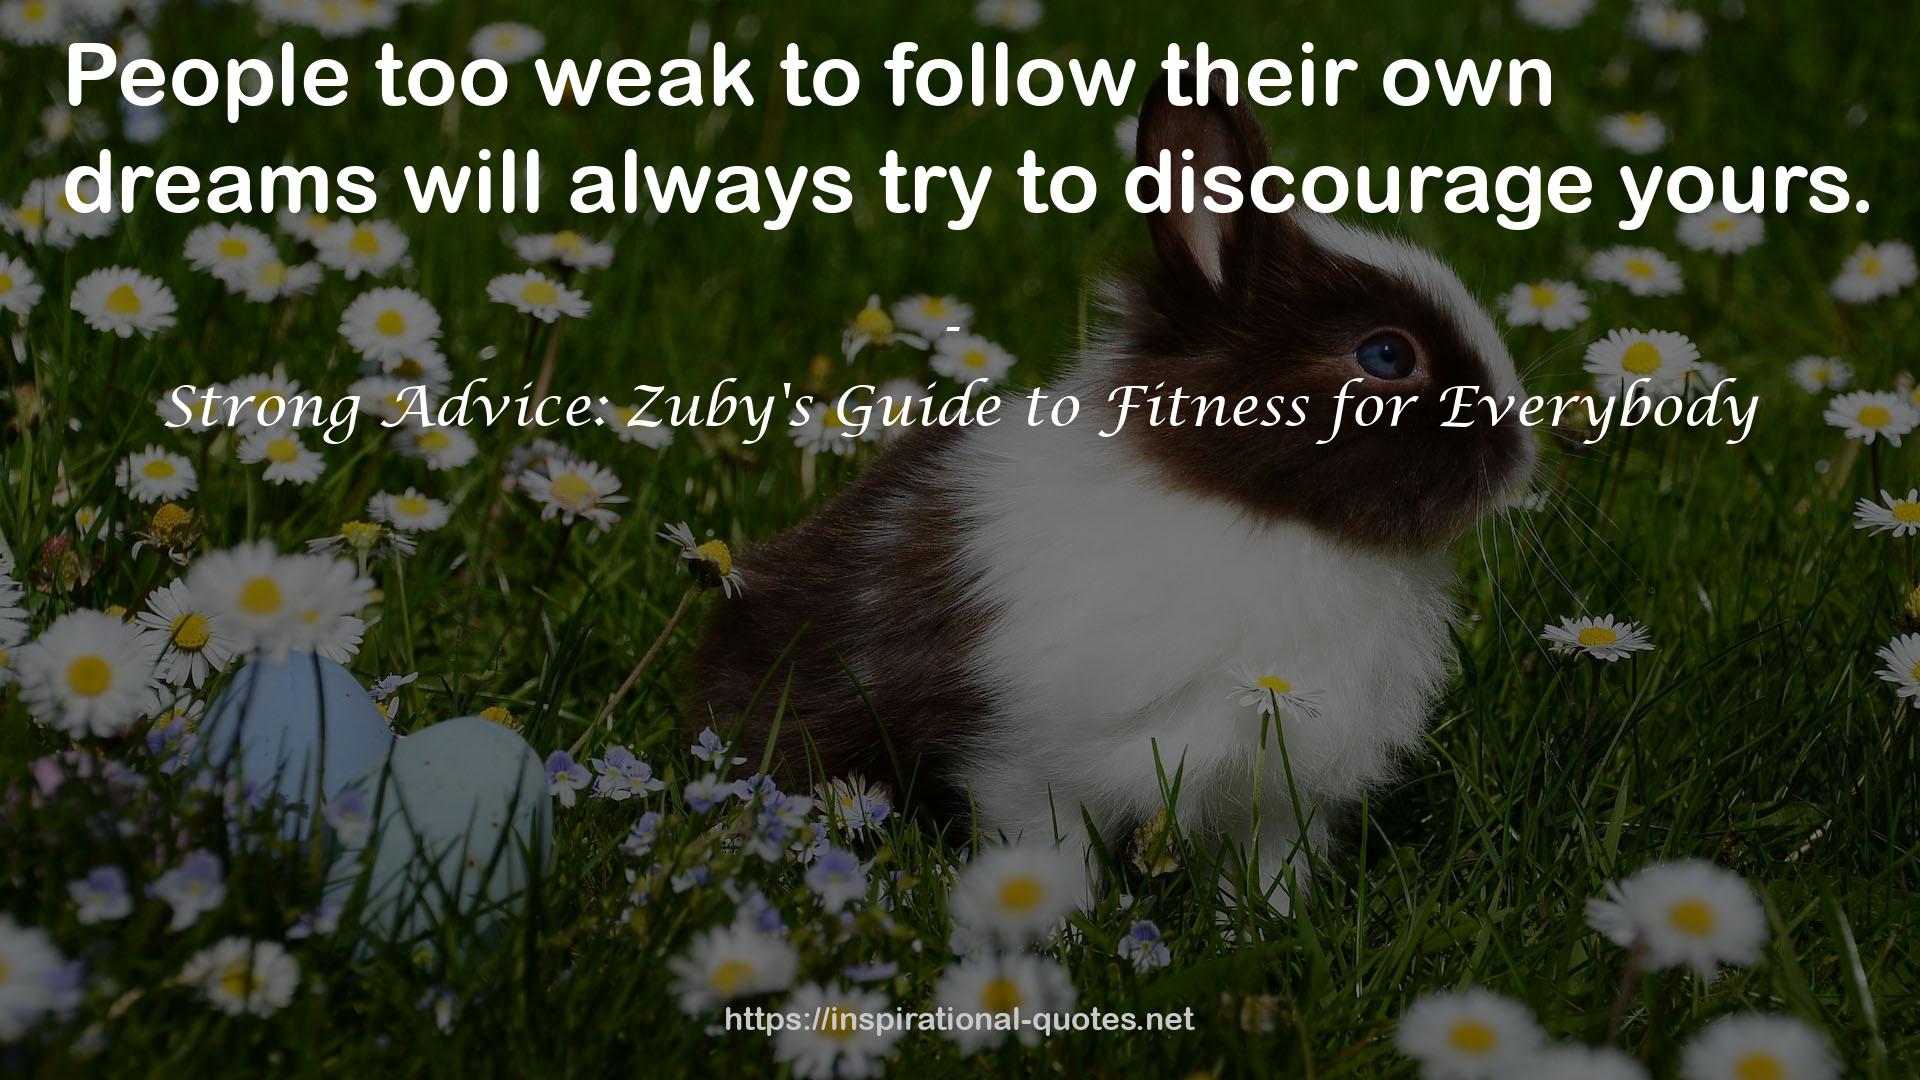 Strong Advice: Zuby's Guide to Fitness for Everybody QUOTES